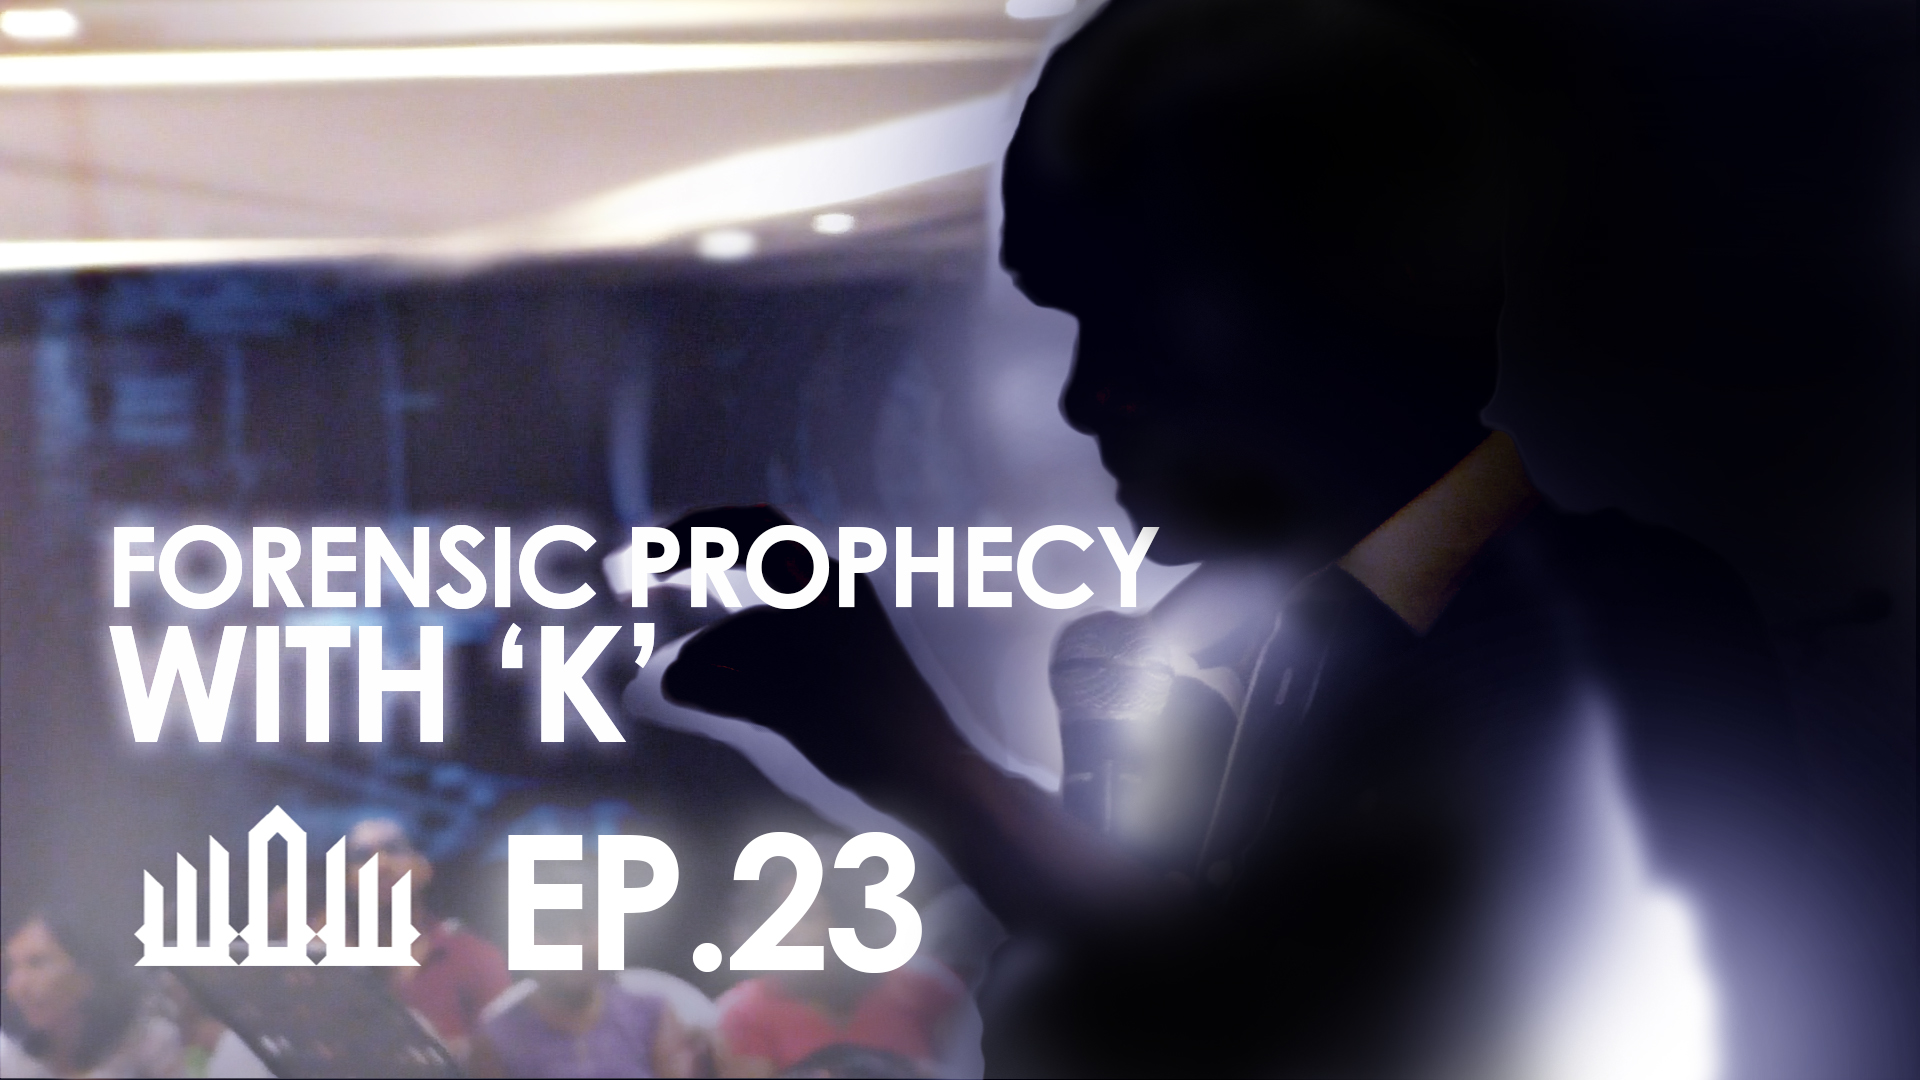 FORENSIC PROPHECY EP. 23 – KIRBY DE LANEROLLE